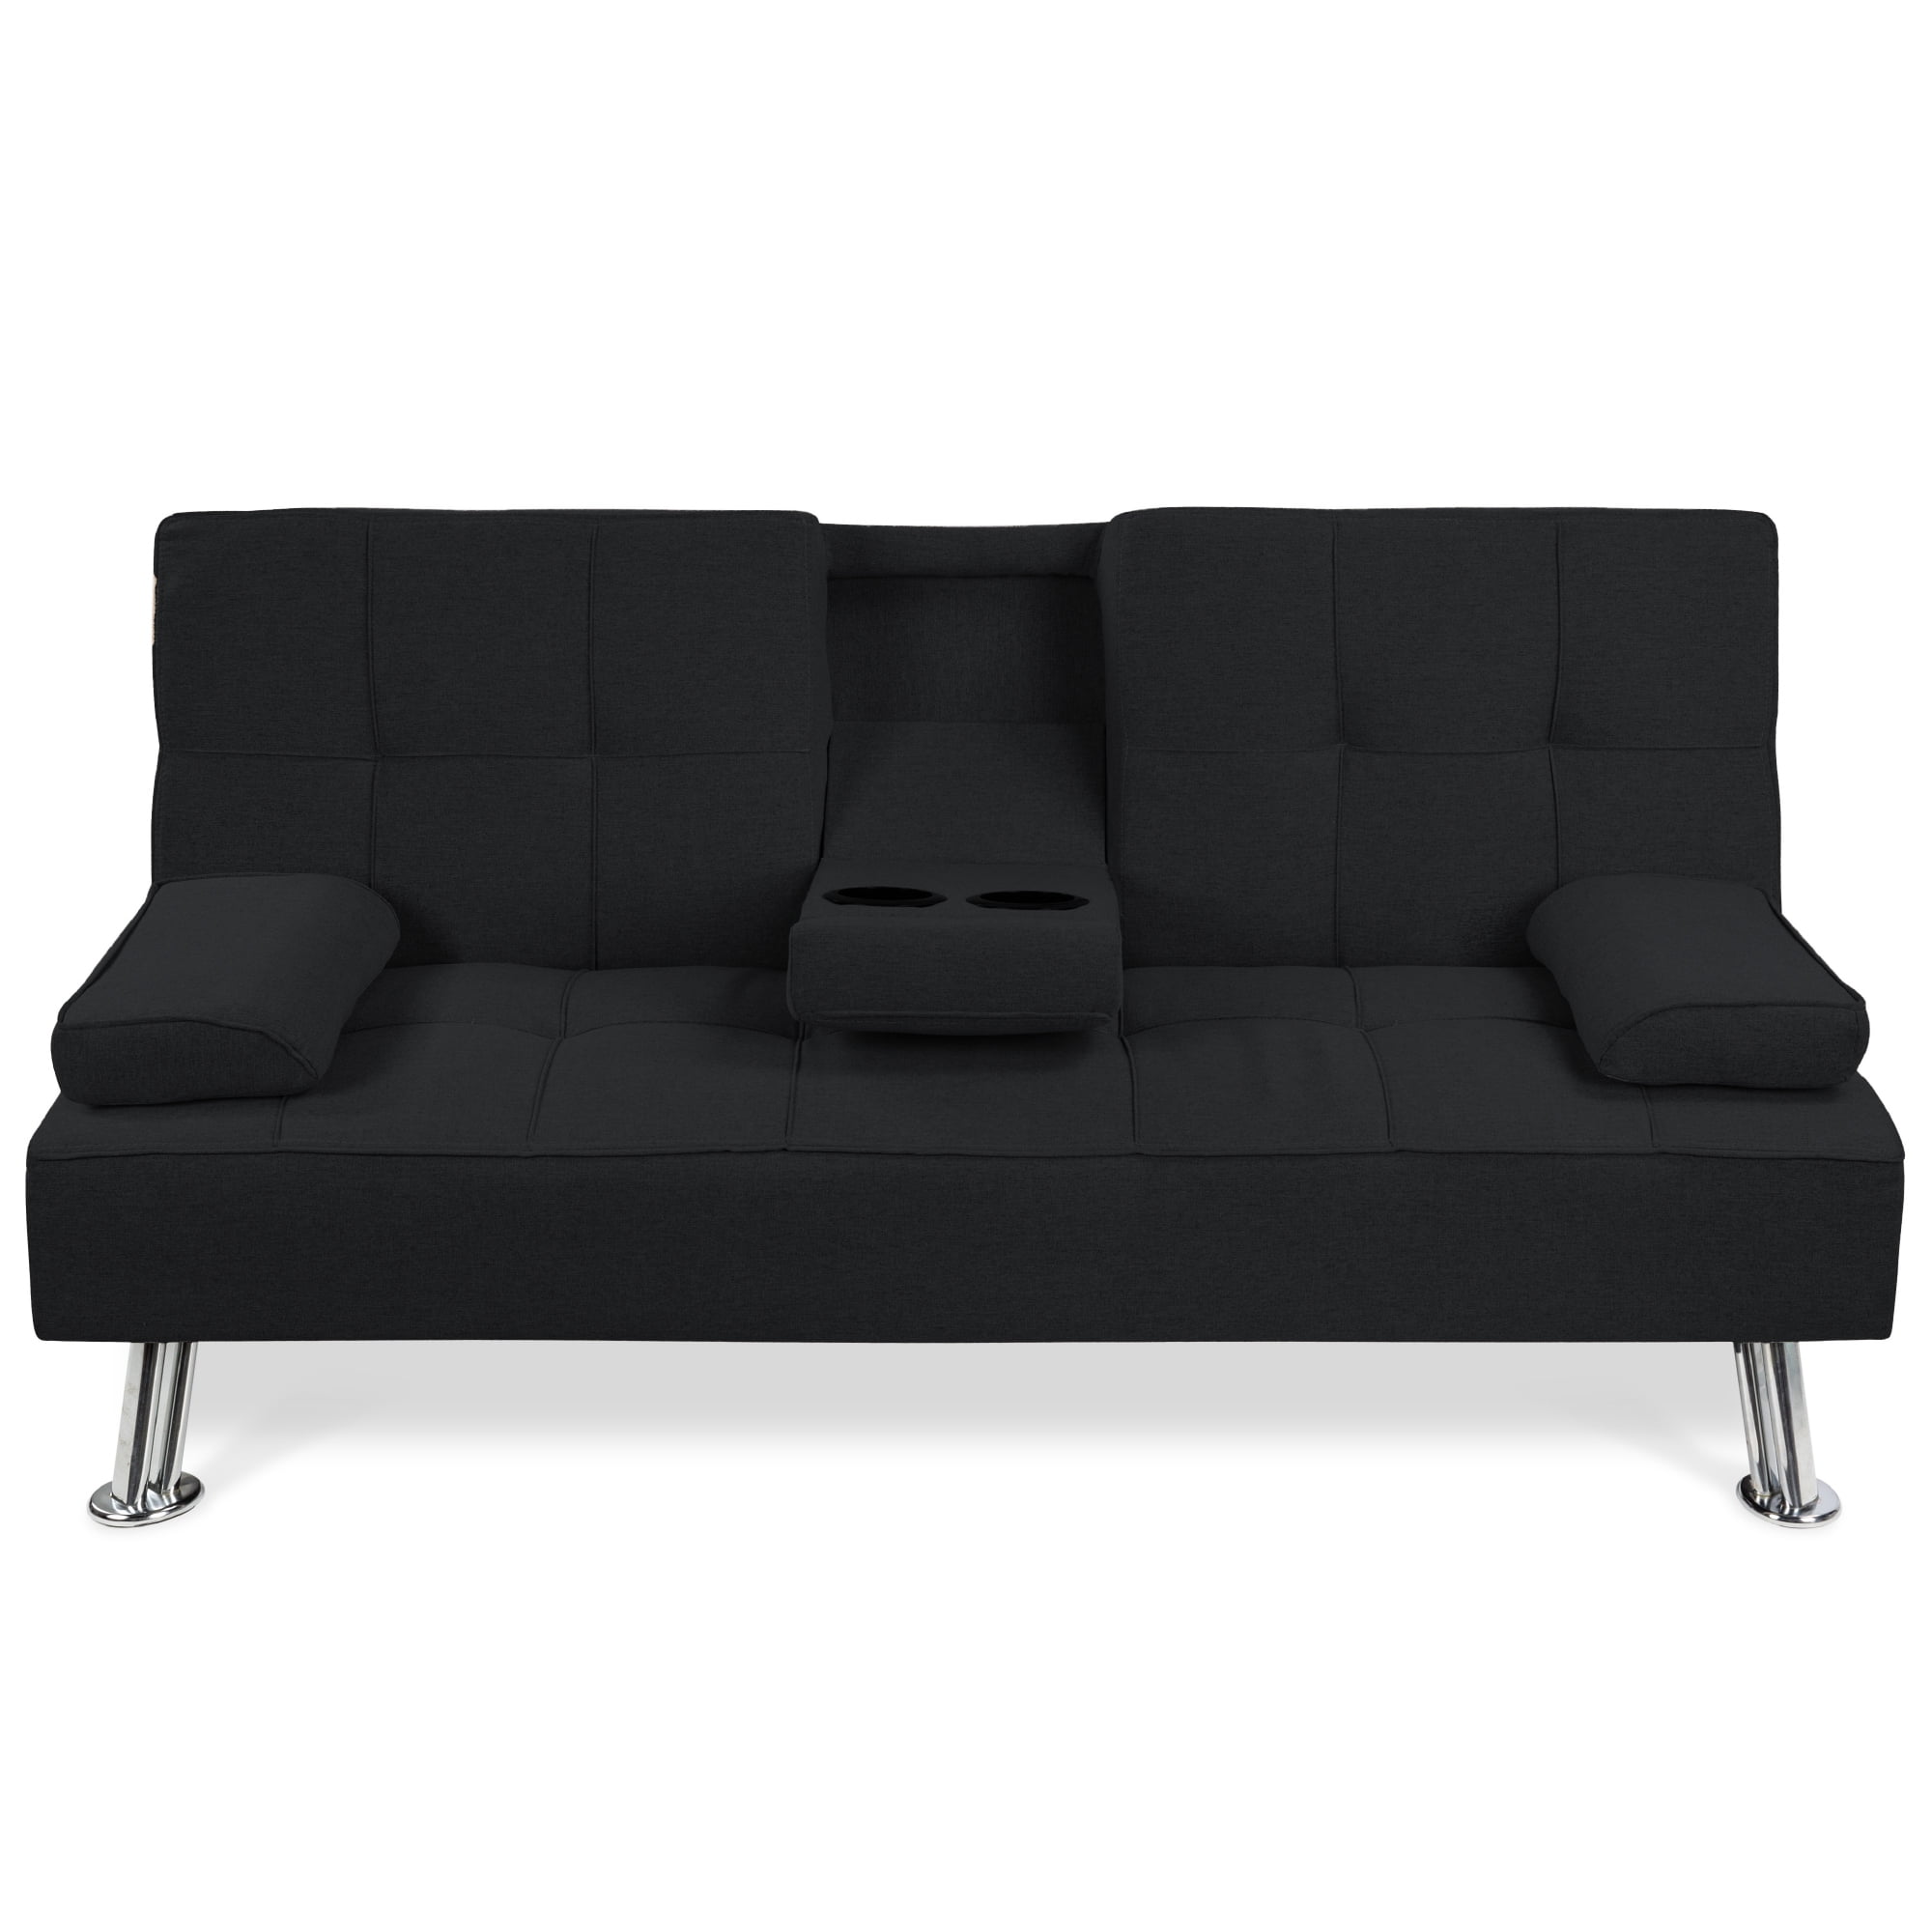 Best Choice Products SKY2878 Futon Sofa Bed Black for sale online